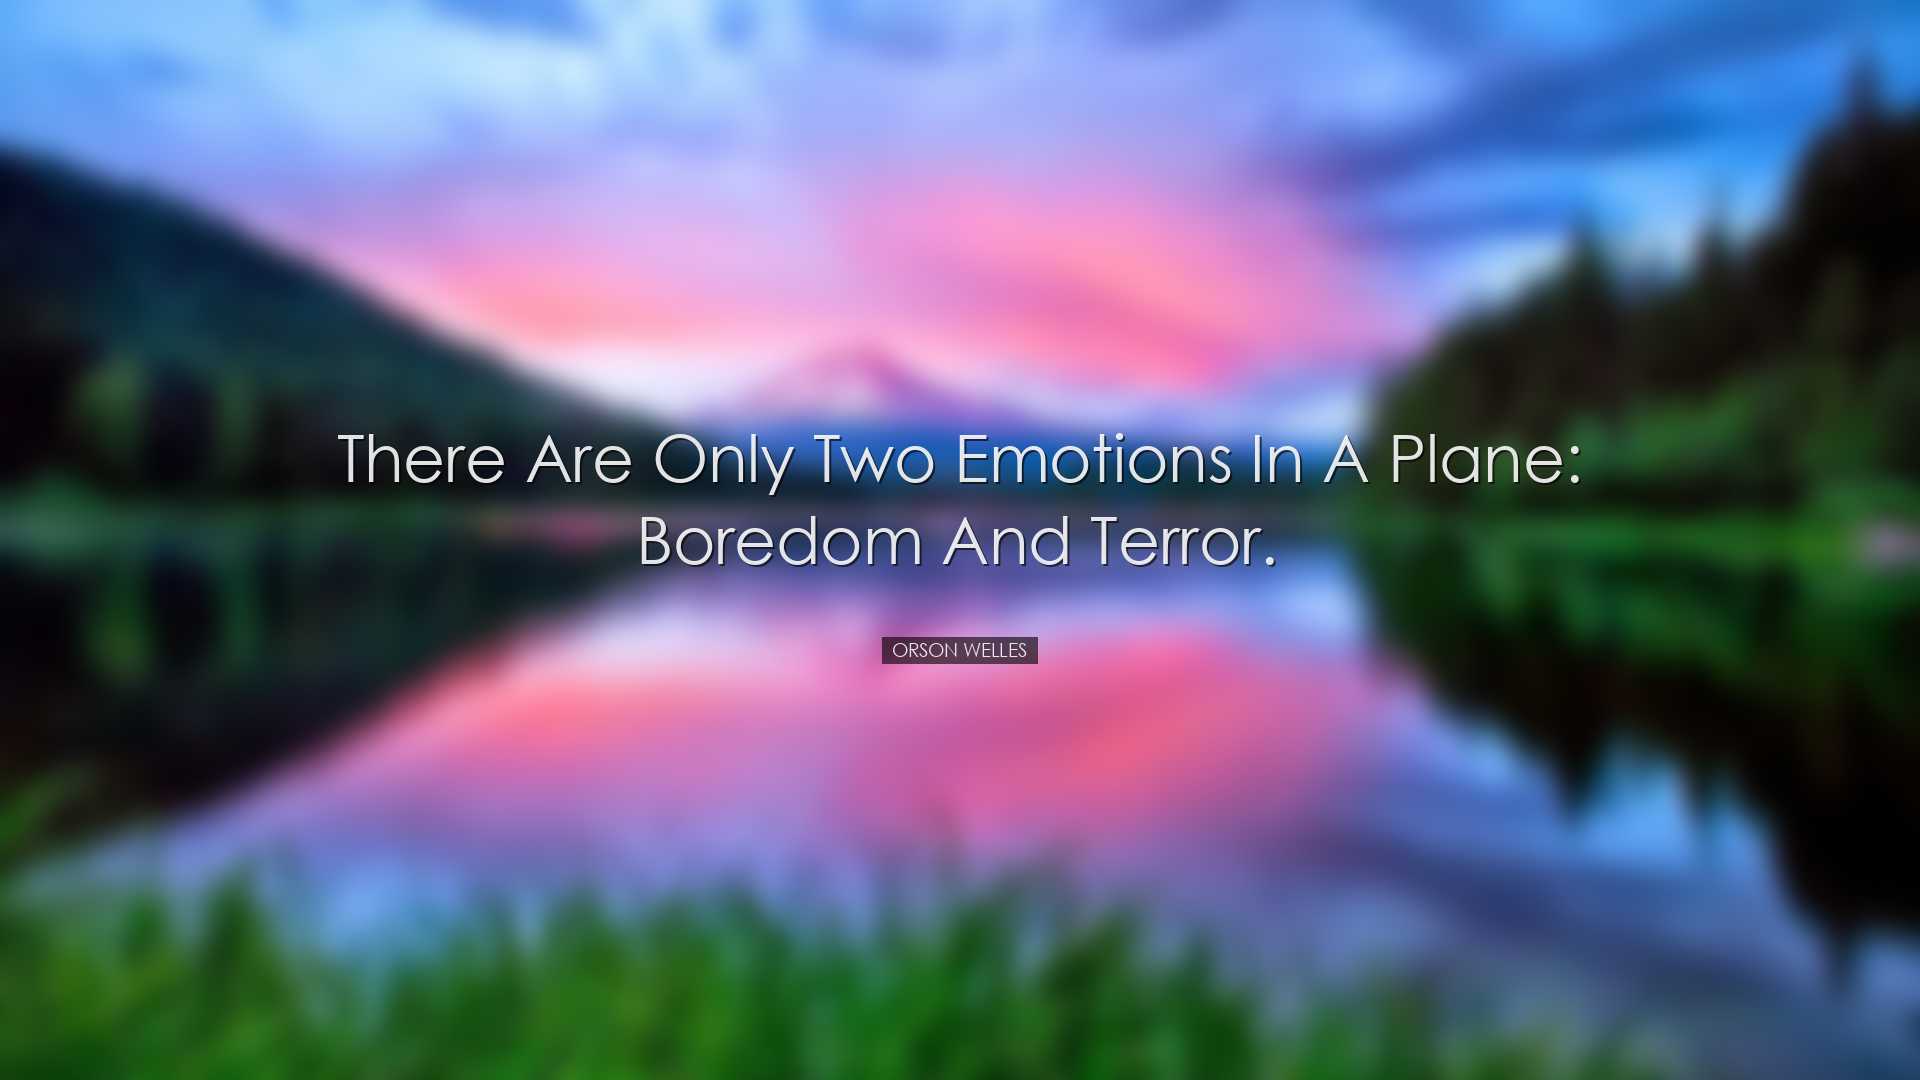 There are only two emotions in a plane: boredom and terror. - Orso